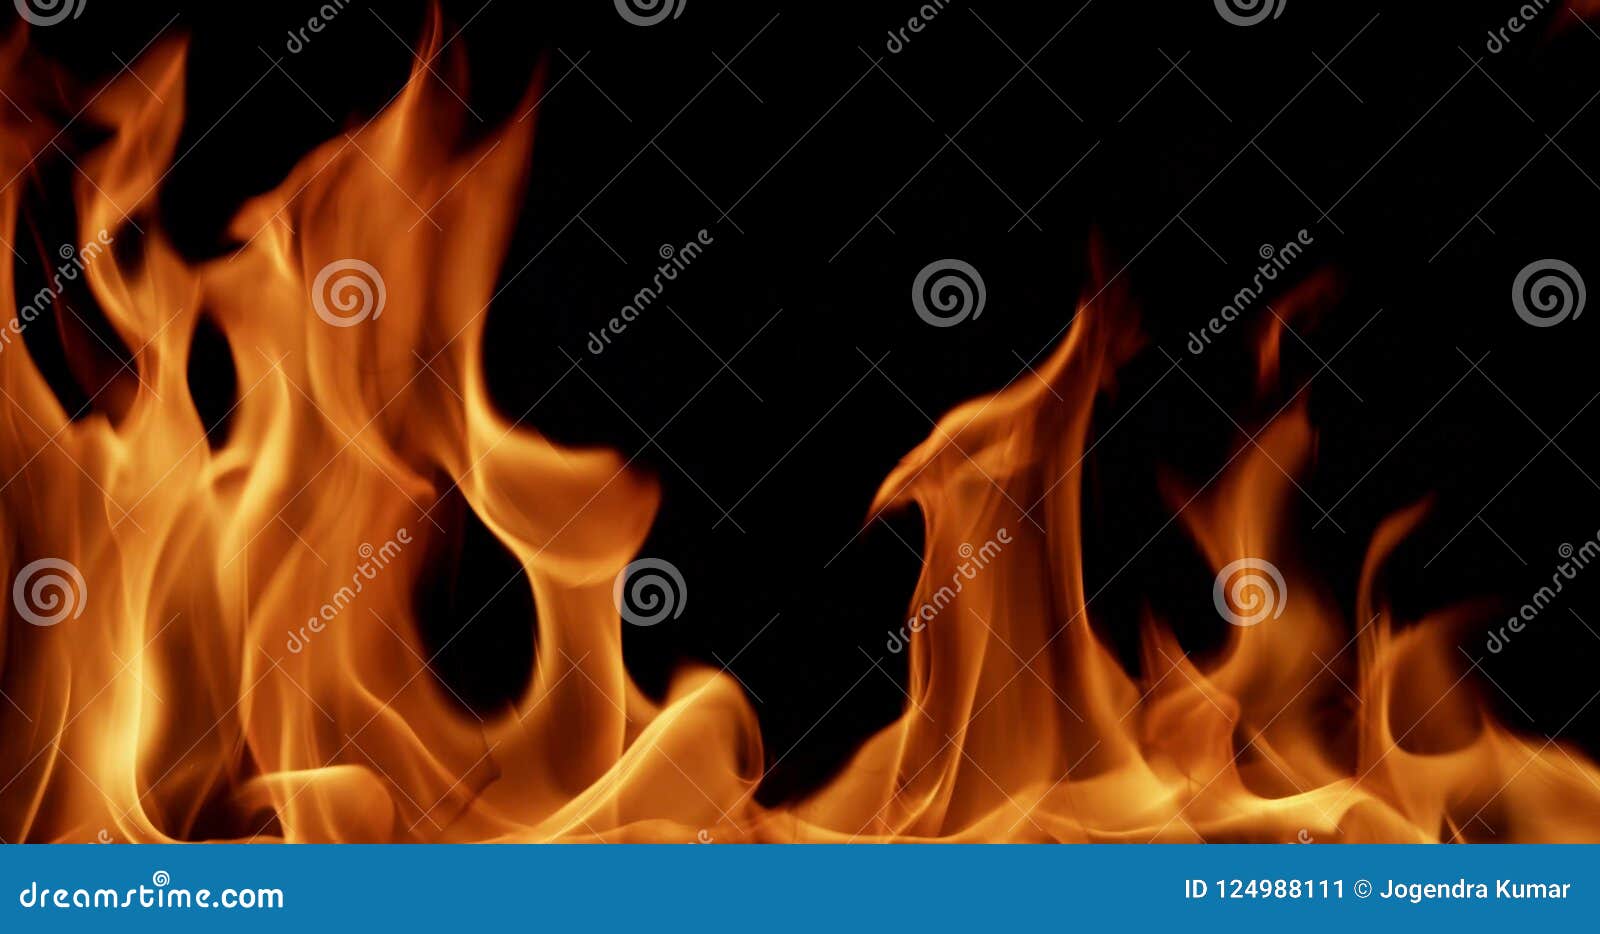 Fire Stock Image for Editing Use Stock Image - Image of footage, design:  124988111